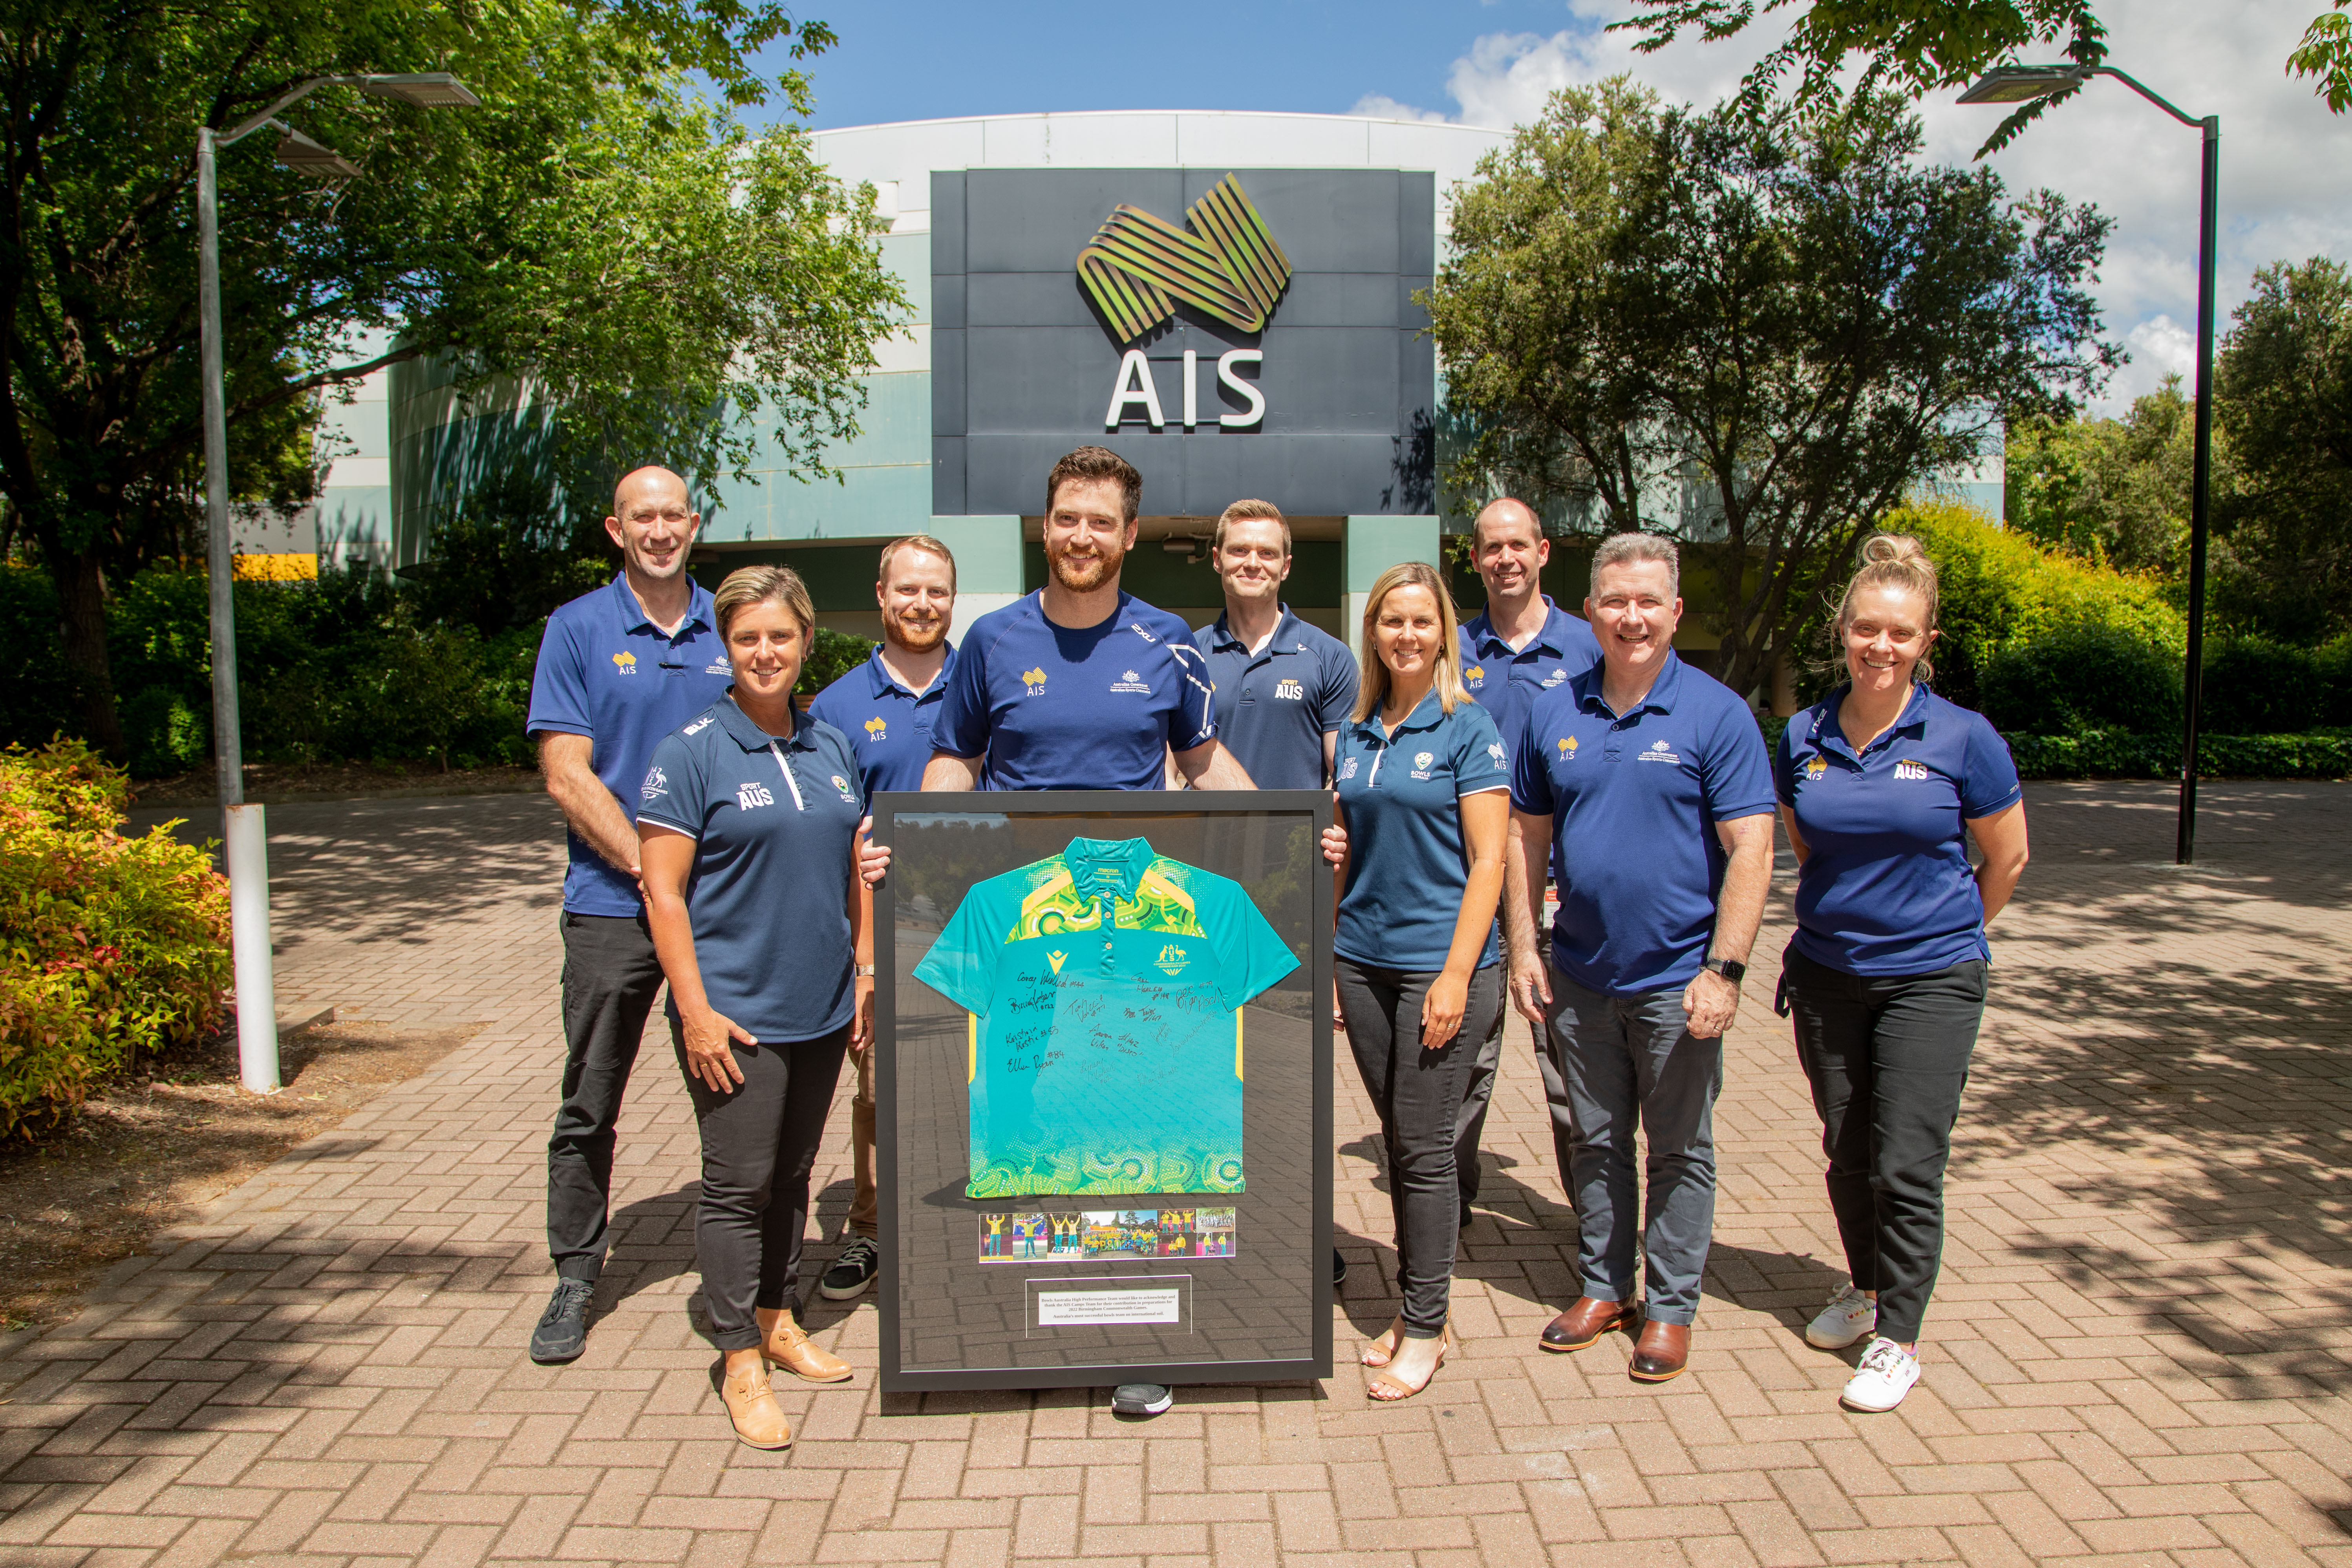 Image of people from the AIS and Bowls Australia wearing blue shirts stand in front of an AIS sign with a framed jersey